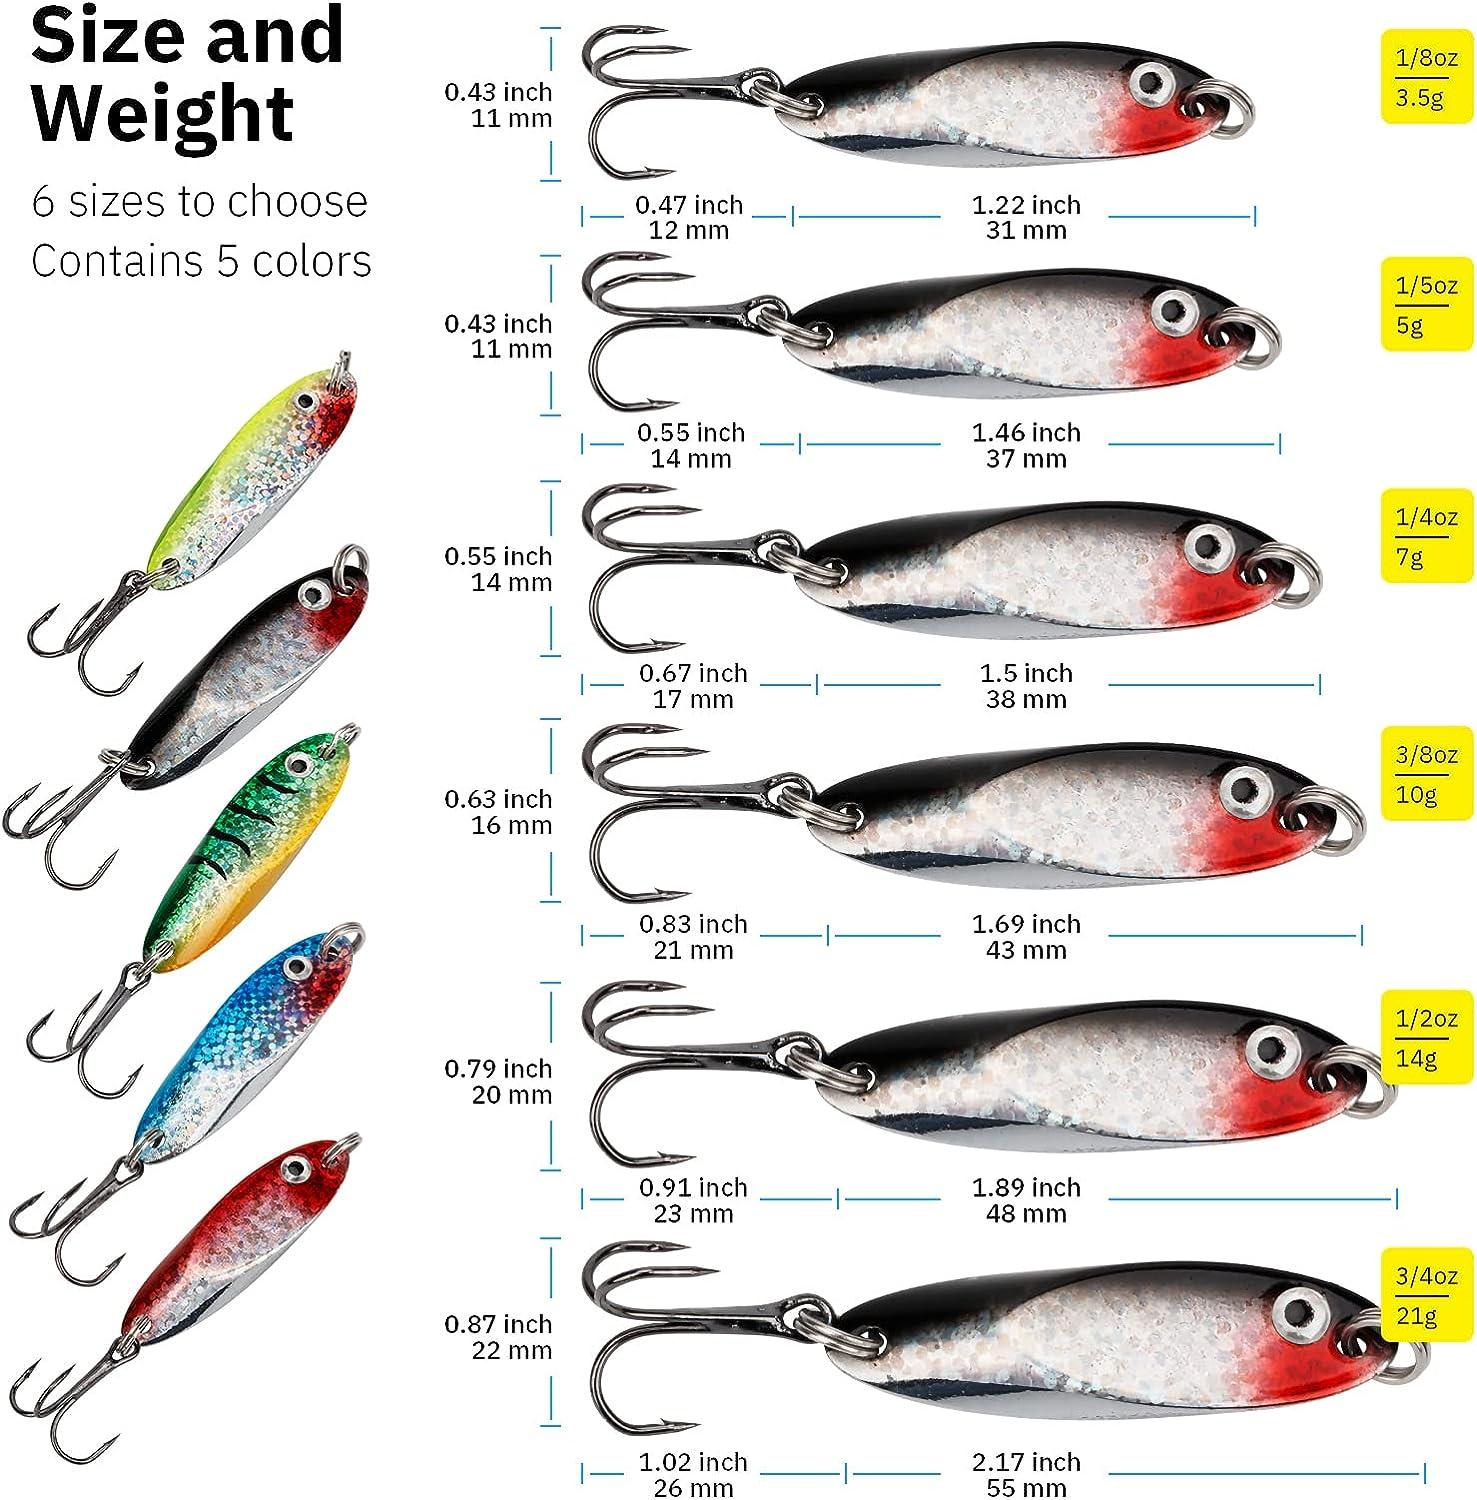 Fishing Lures Fishing Spoons Trout Lures Saltwater Spoon Lures Casting Spoon  for Trout Bass Pike Walleye 1/8oz 1/5oz 1/4oz 3/8oz 1/2oz 3/4oz - China  Fishing Tackle and Fishing Lure price